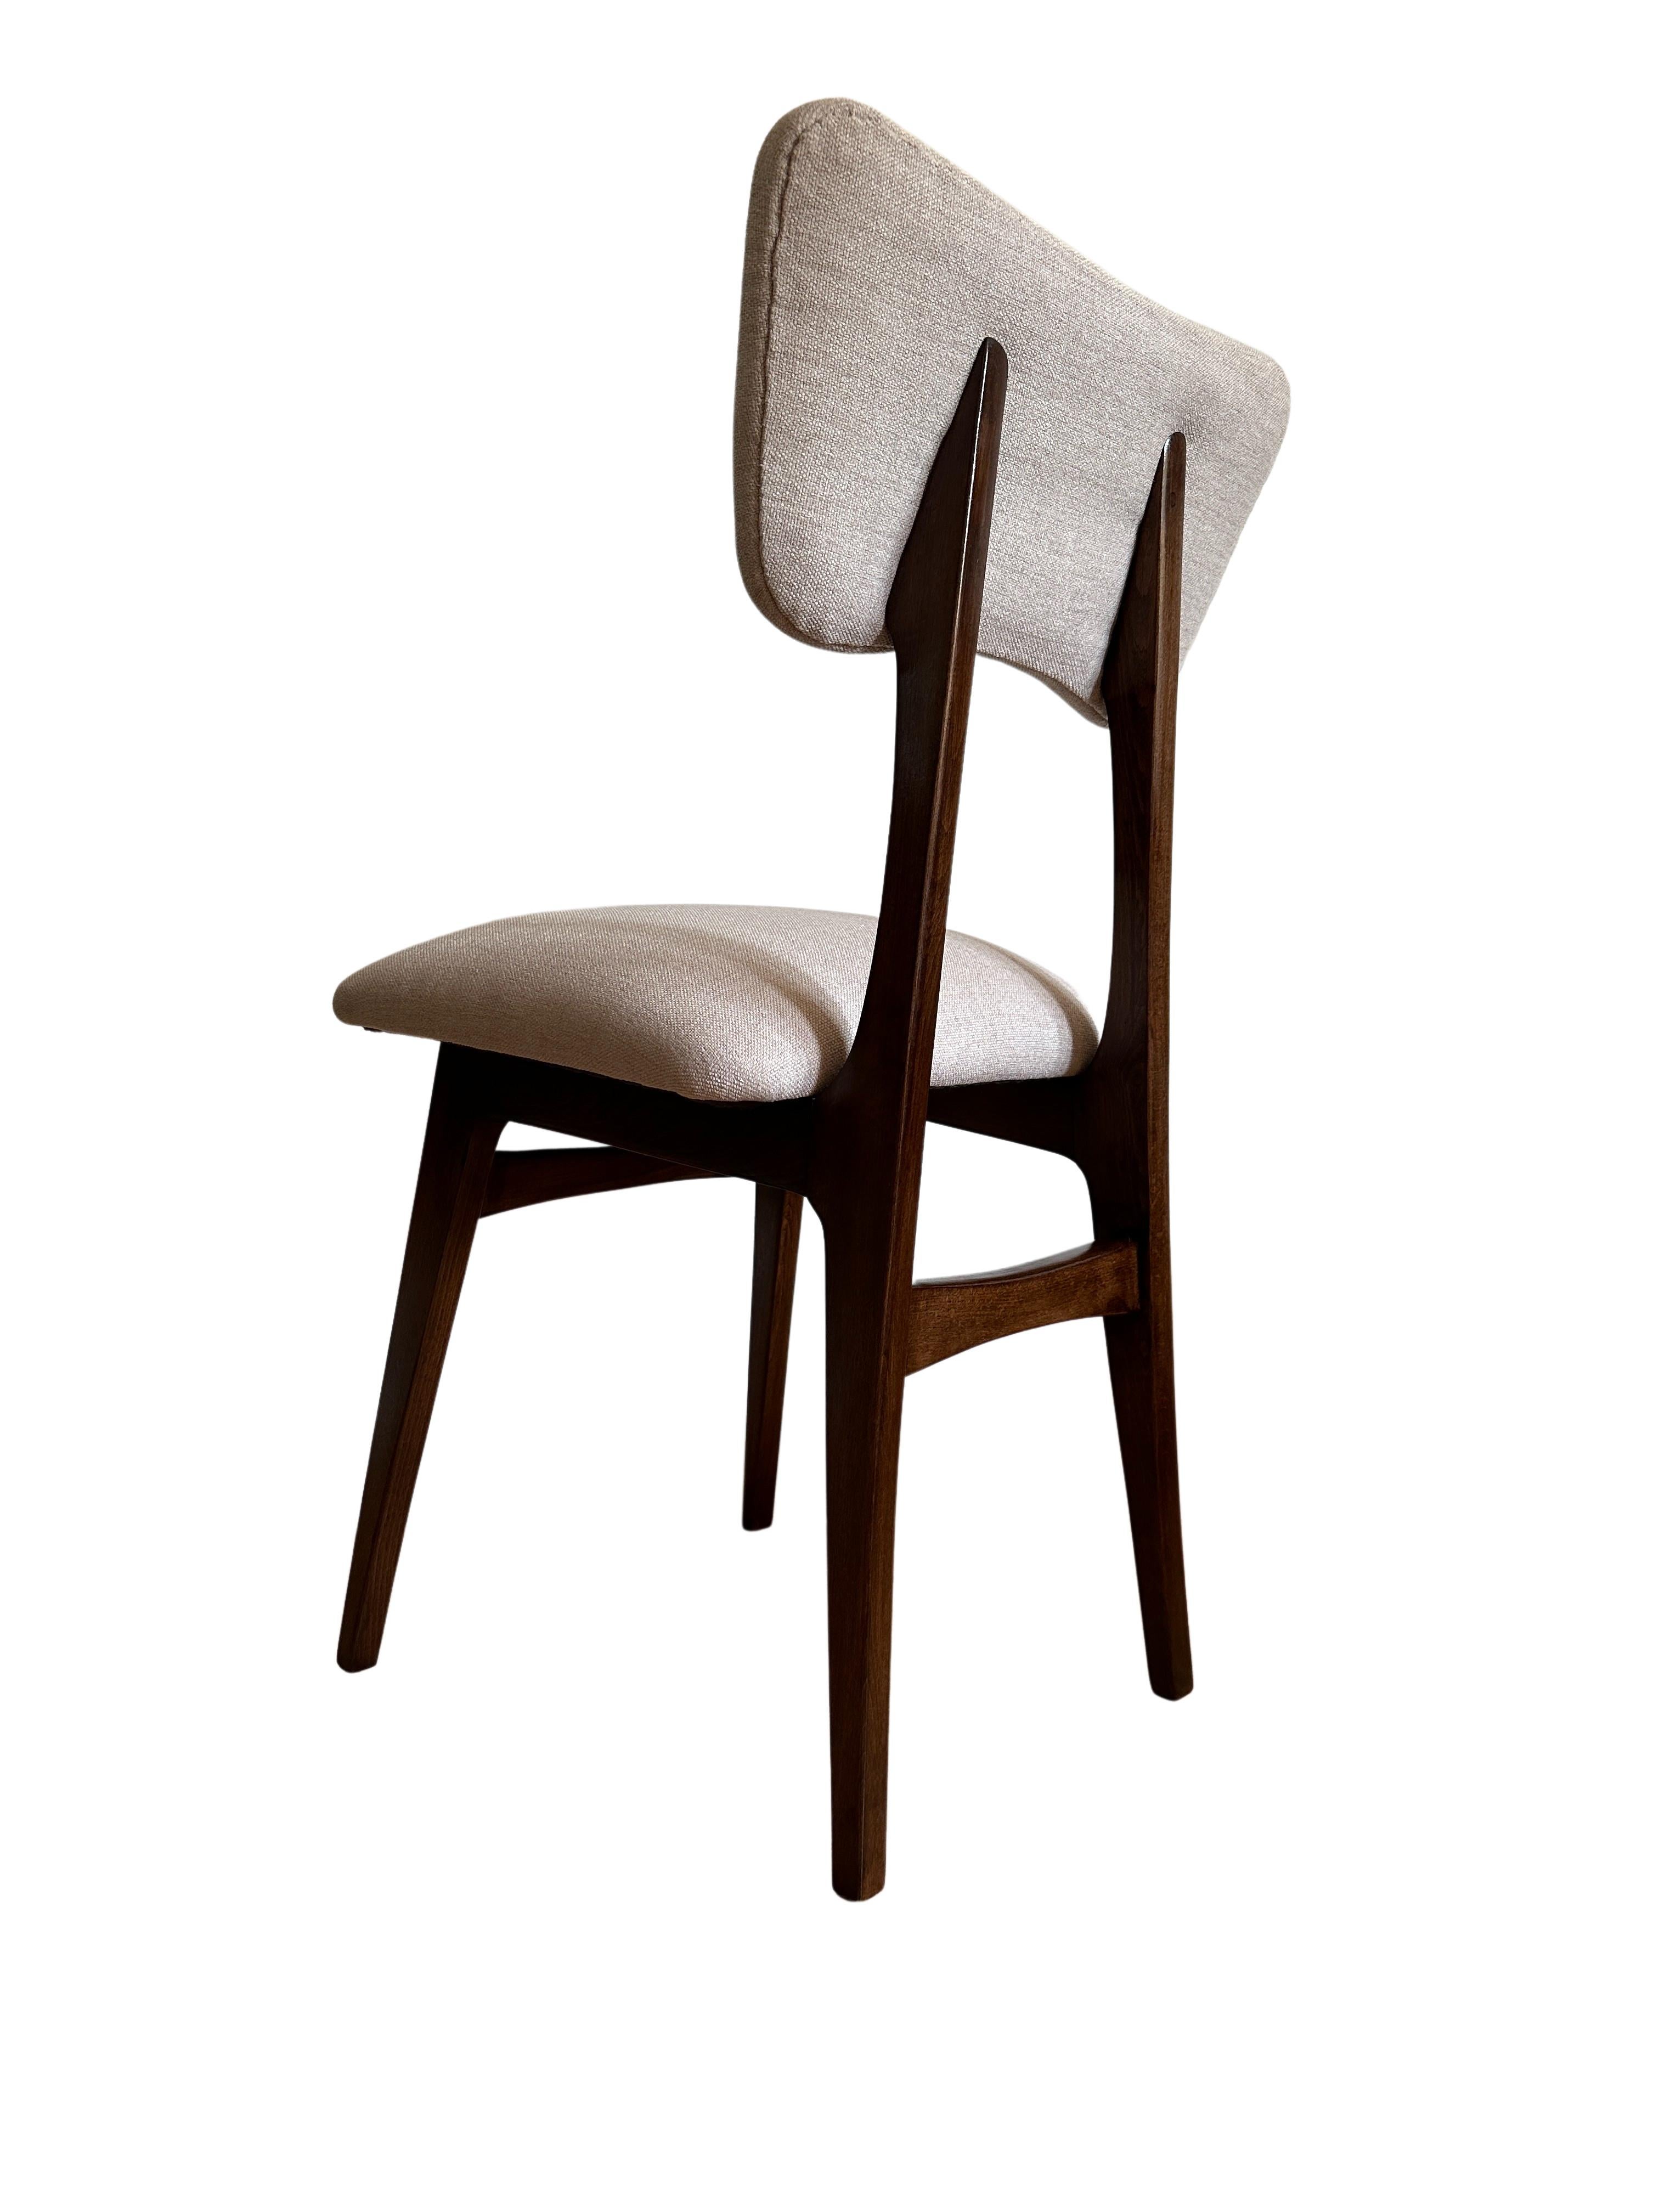 Set of 6 Midcentury Beige and Grey Dining Chairs, Europe, 1960s For Sale 1